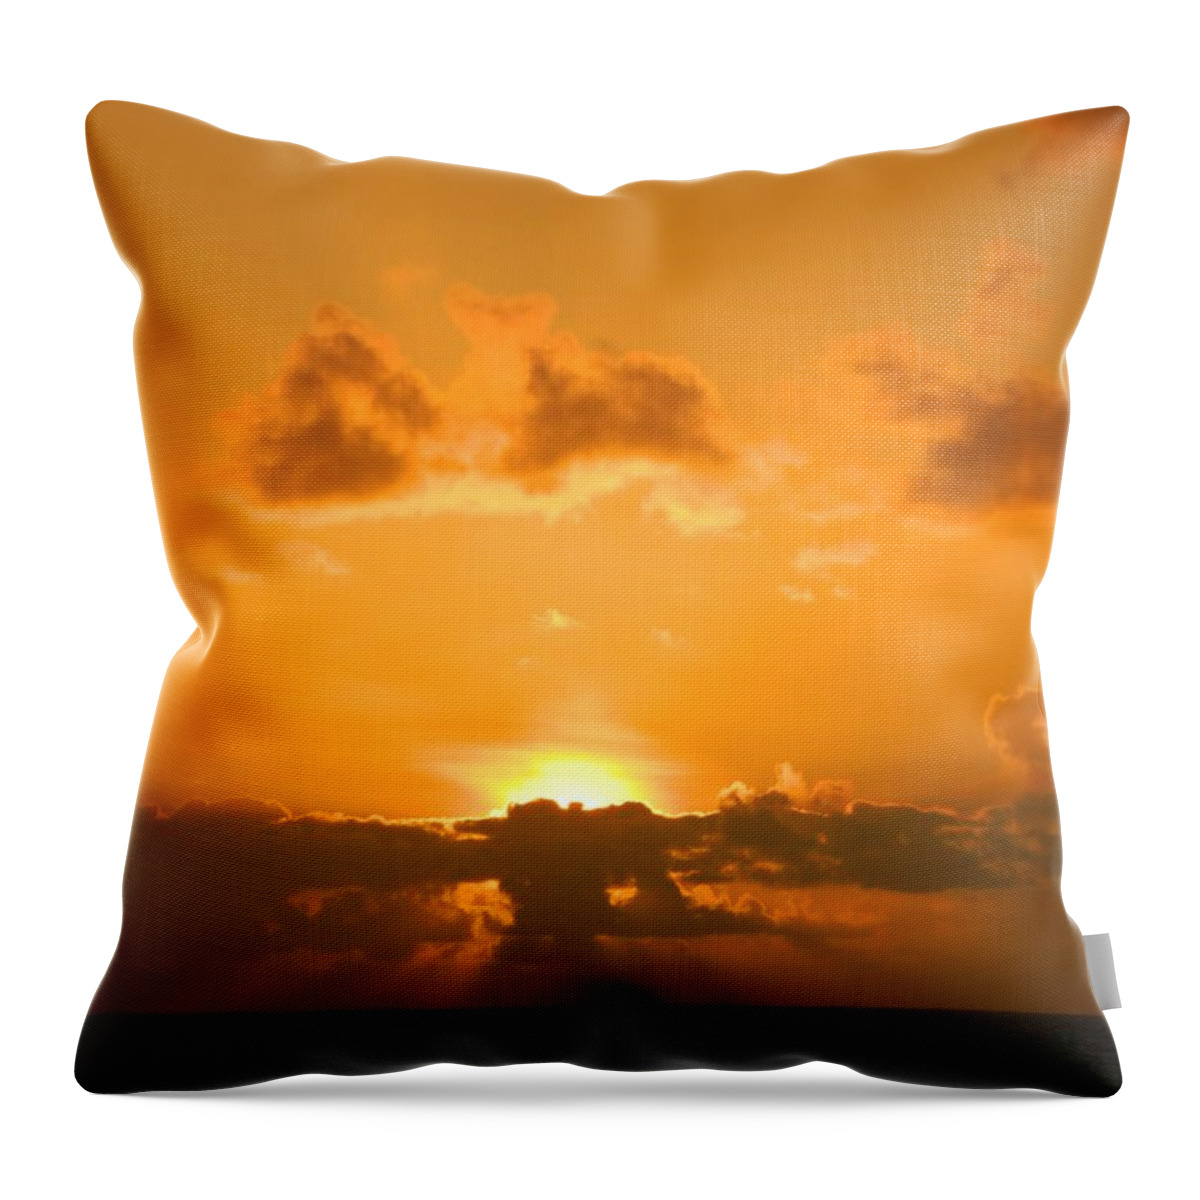 Sunset Throw Pillow featuring the photograph Golden Sunset by Gallery Of Hope 